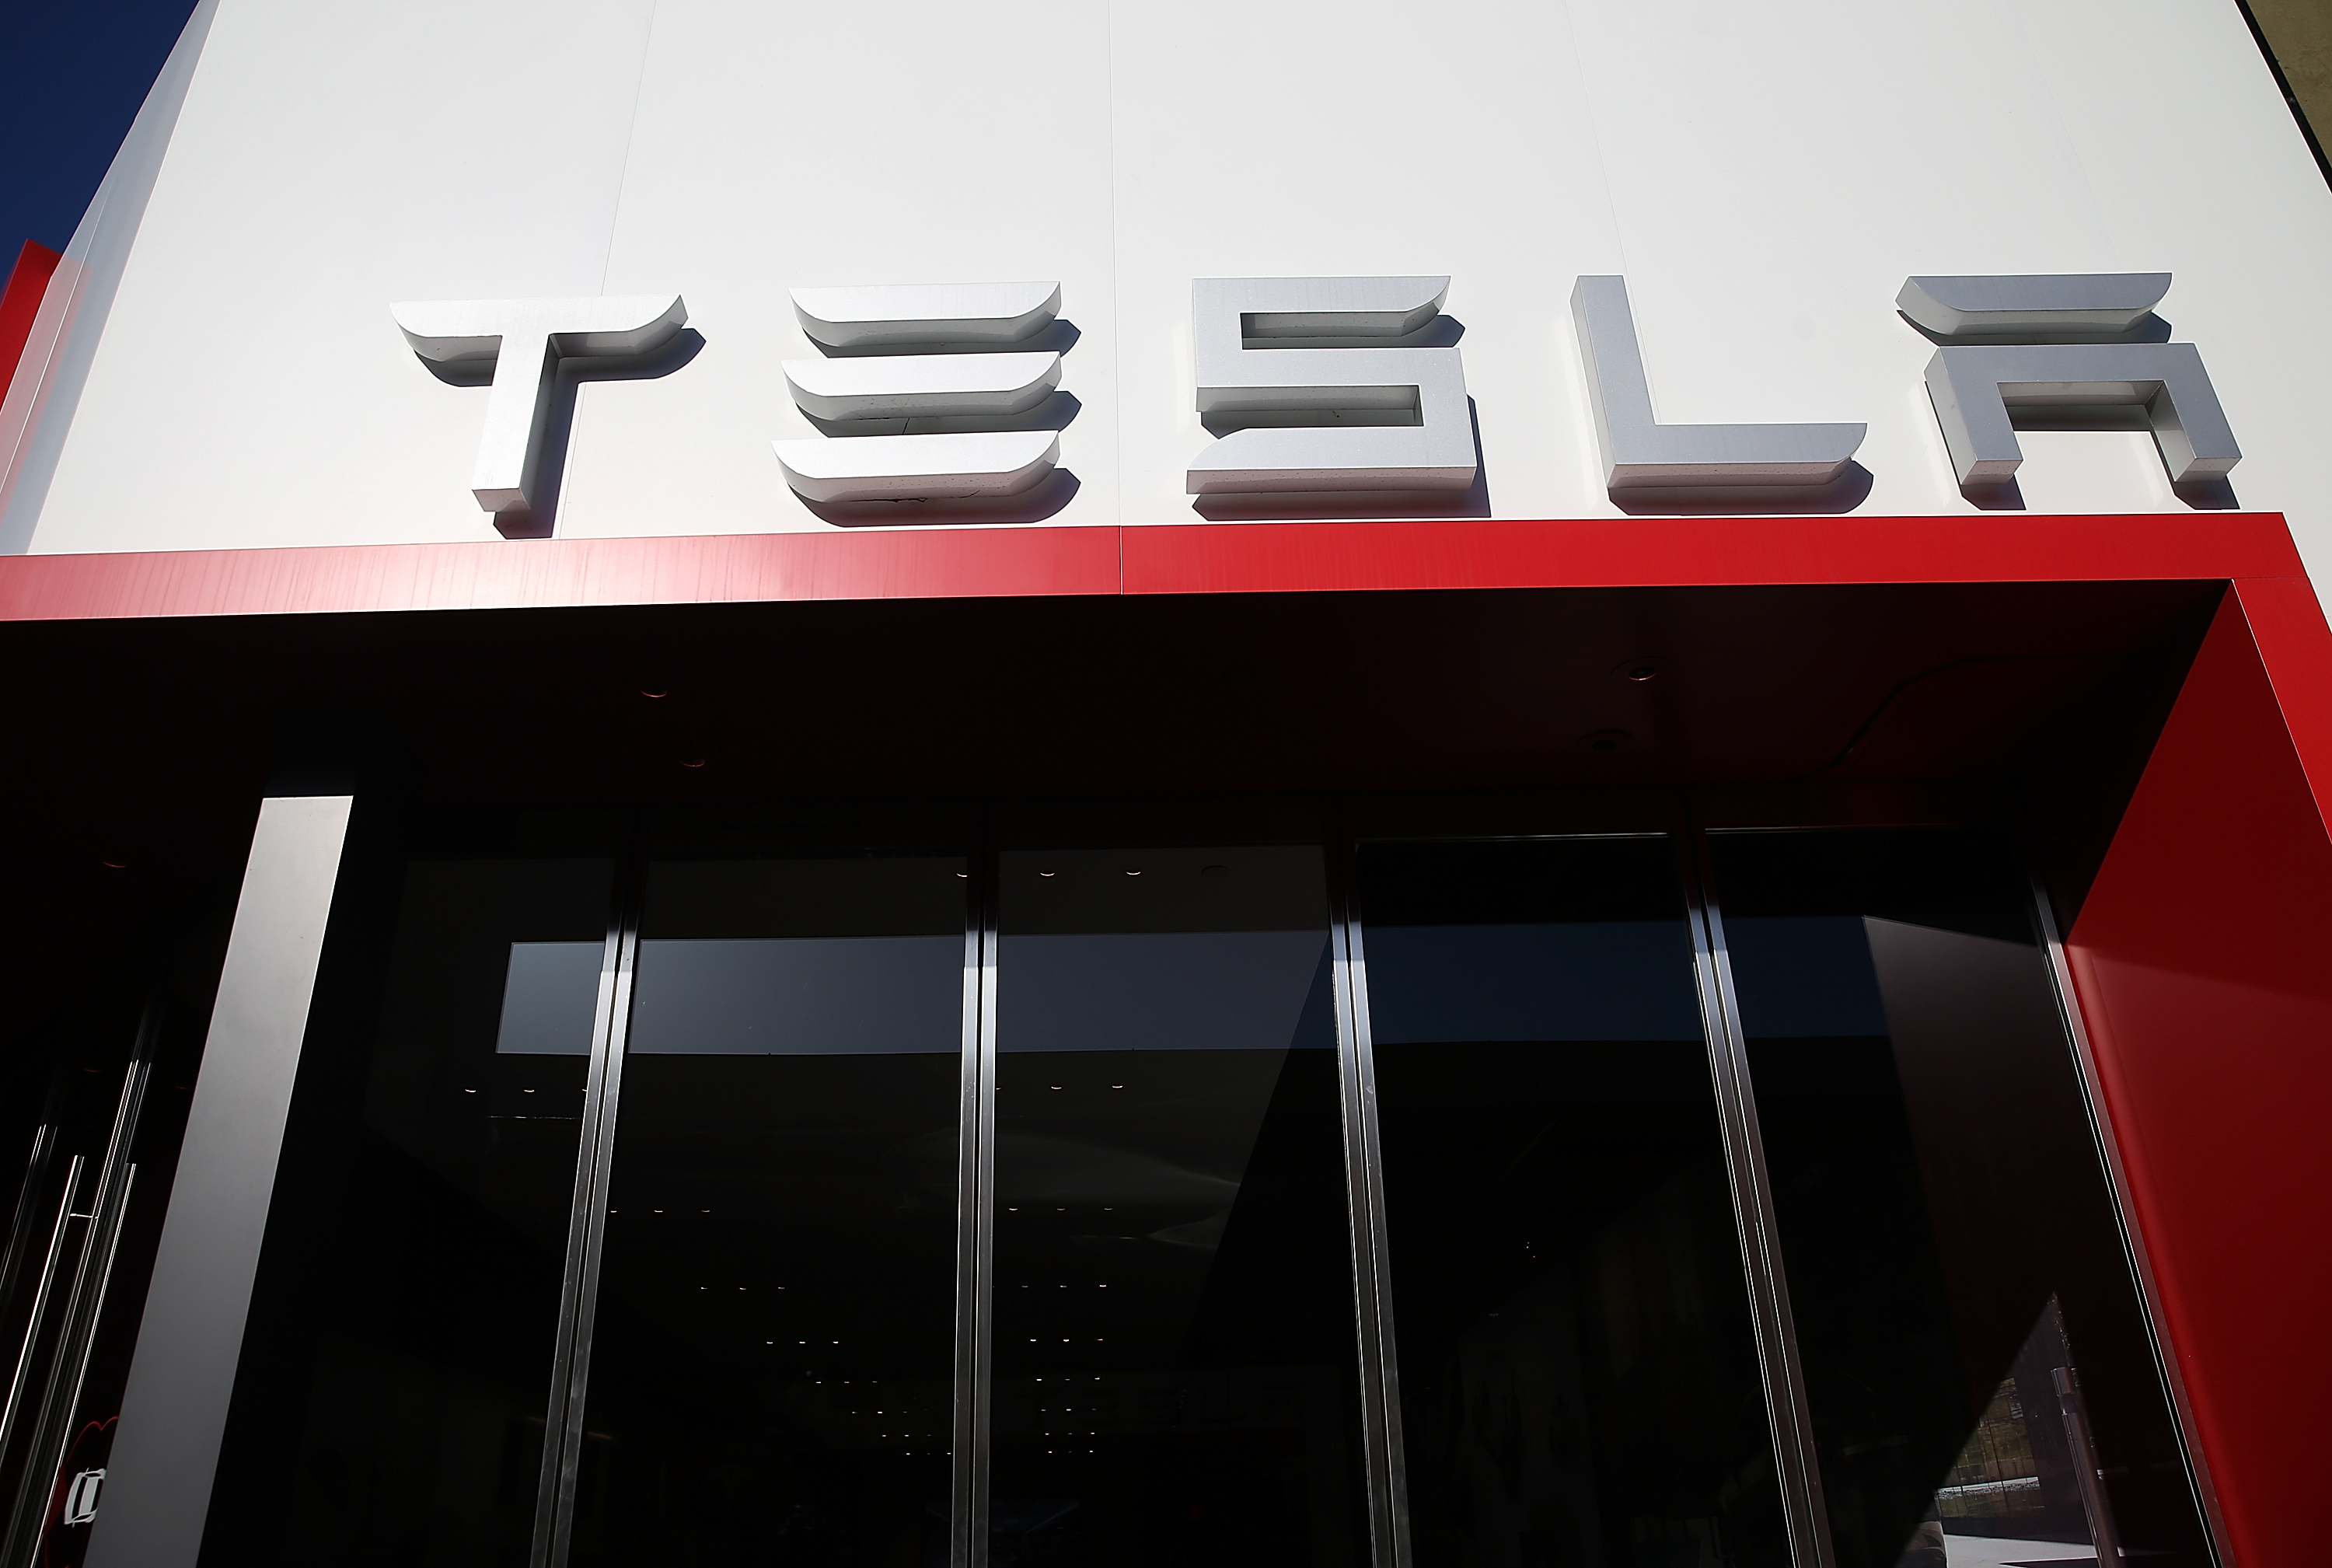 CORTE MADERA, CALIFORNIA - APRIL 04: An exterior view of a Tesla showroom on April 4, 2016 in Corte Madera, California. Worldwide pre-orders for Tesla's upcoming Model 3 have surpassed 275,000 in the first week that pre-orders were made available to the public.   Justin Sullivan/Getty Images/AFP